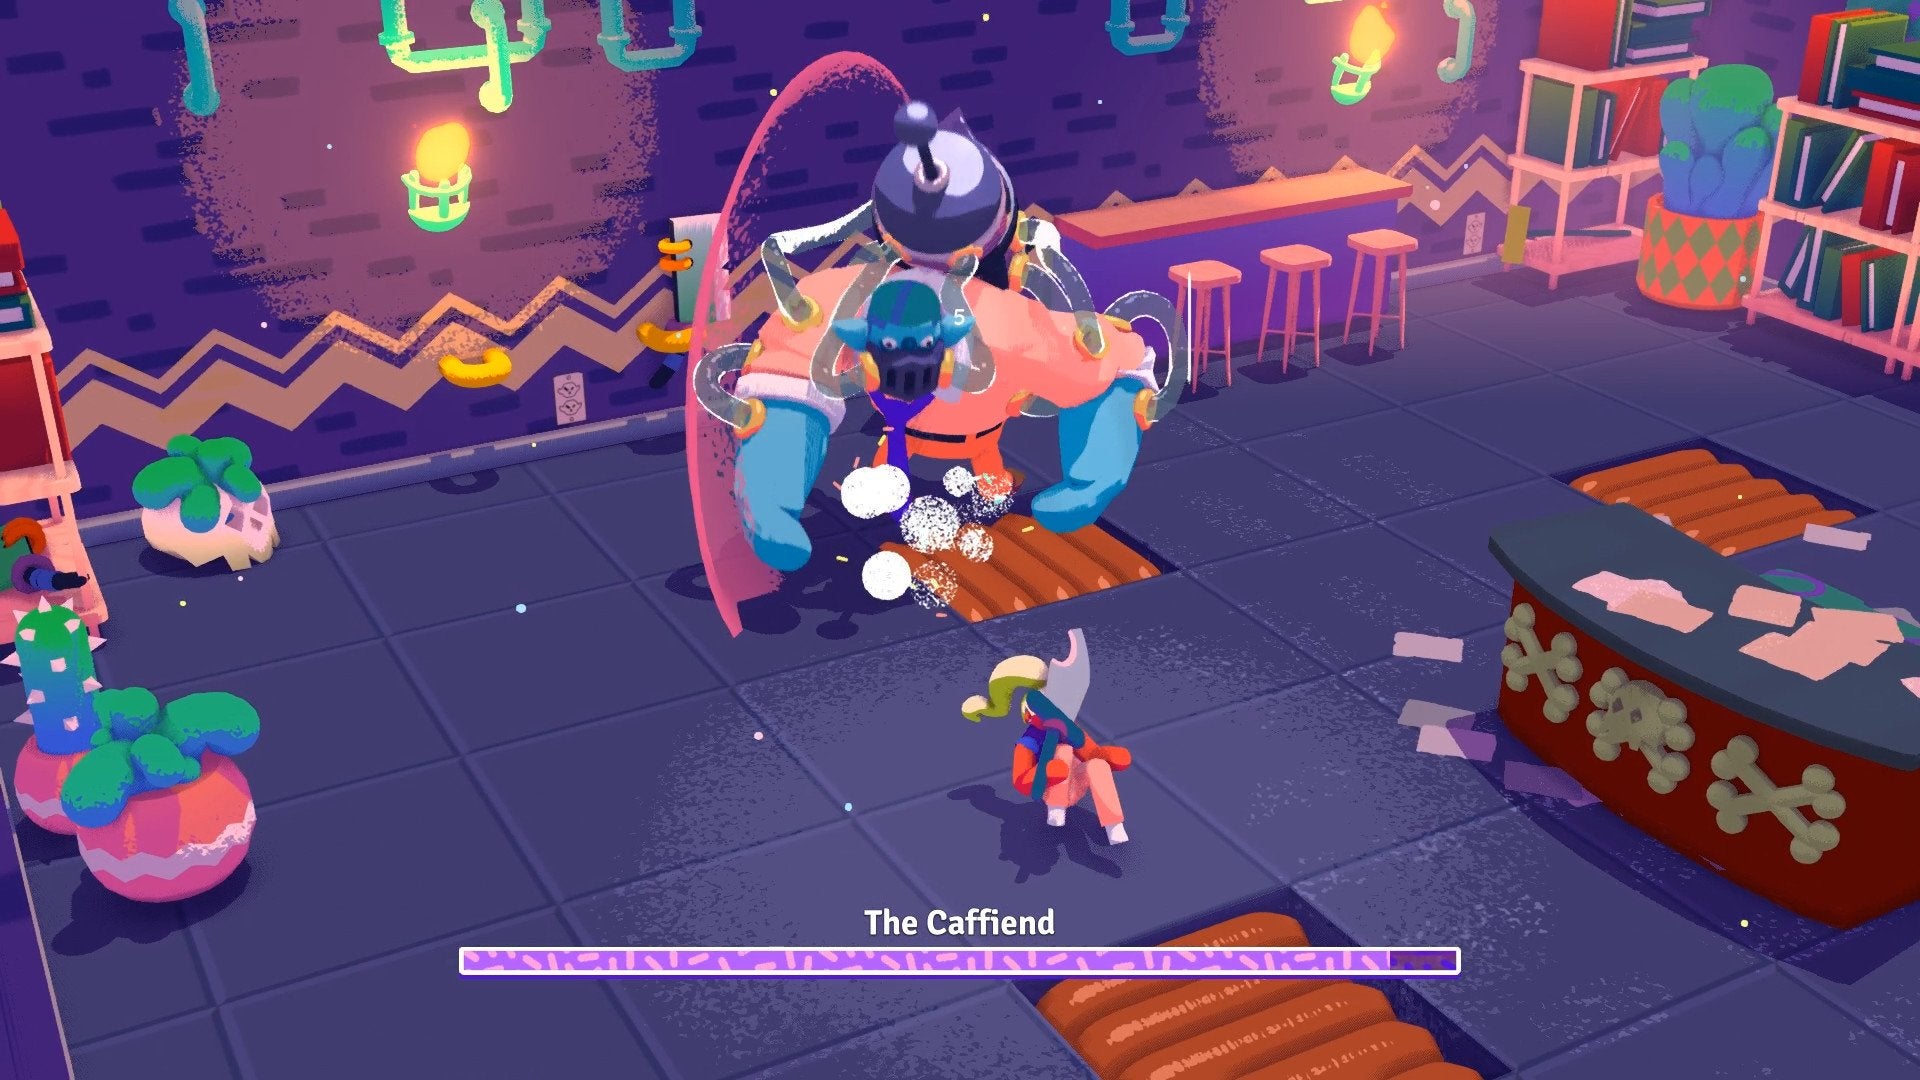 The player fighting a boss named "The Caffiend" in the game Going Under—which is a Soulslike title.